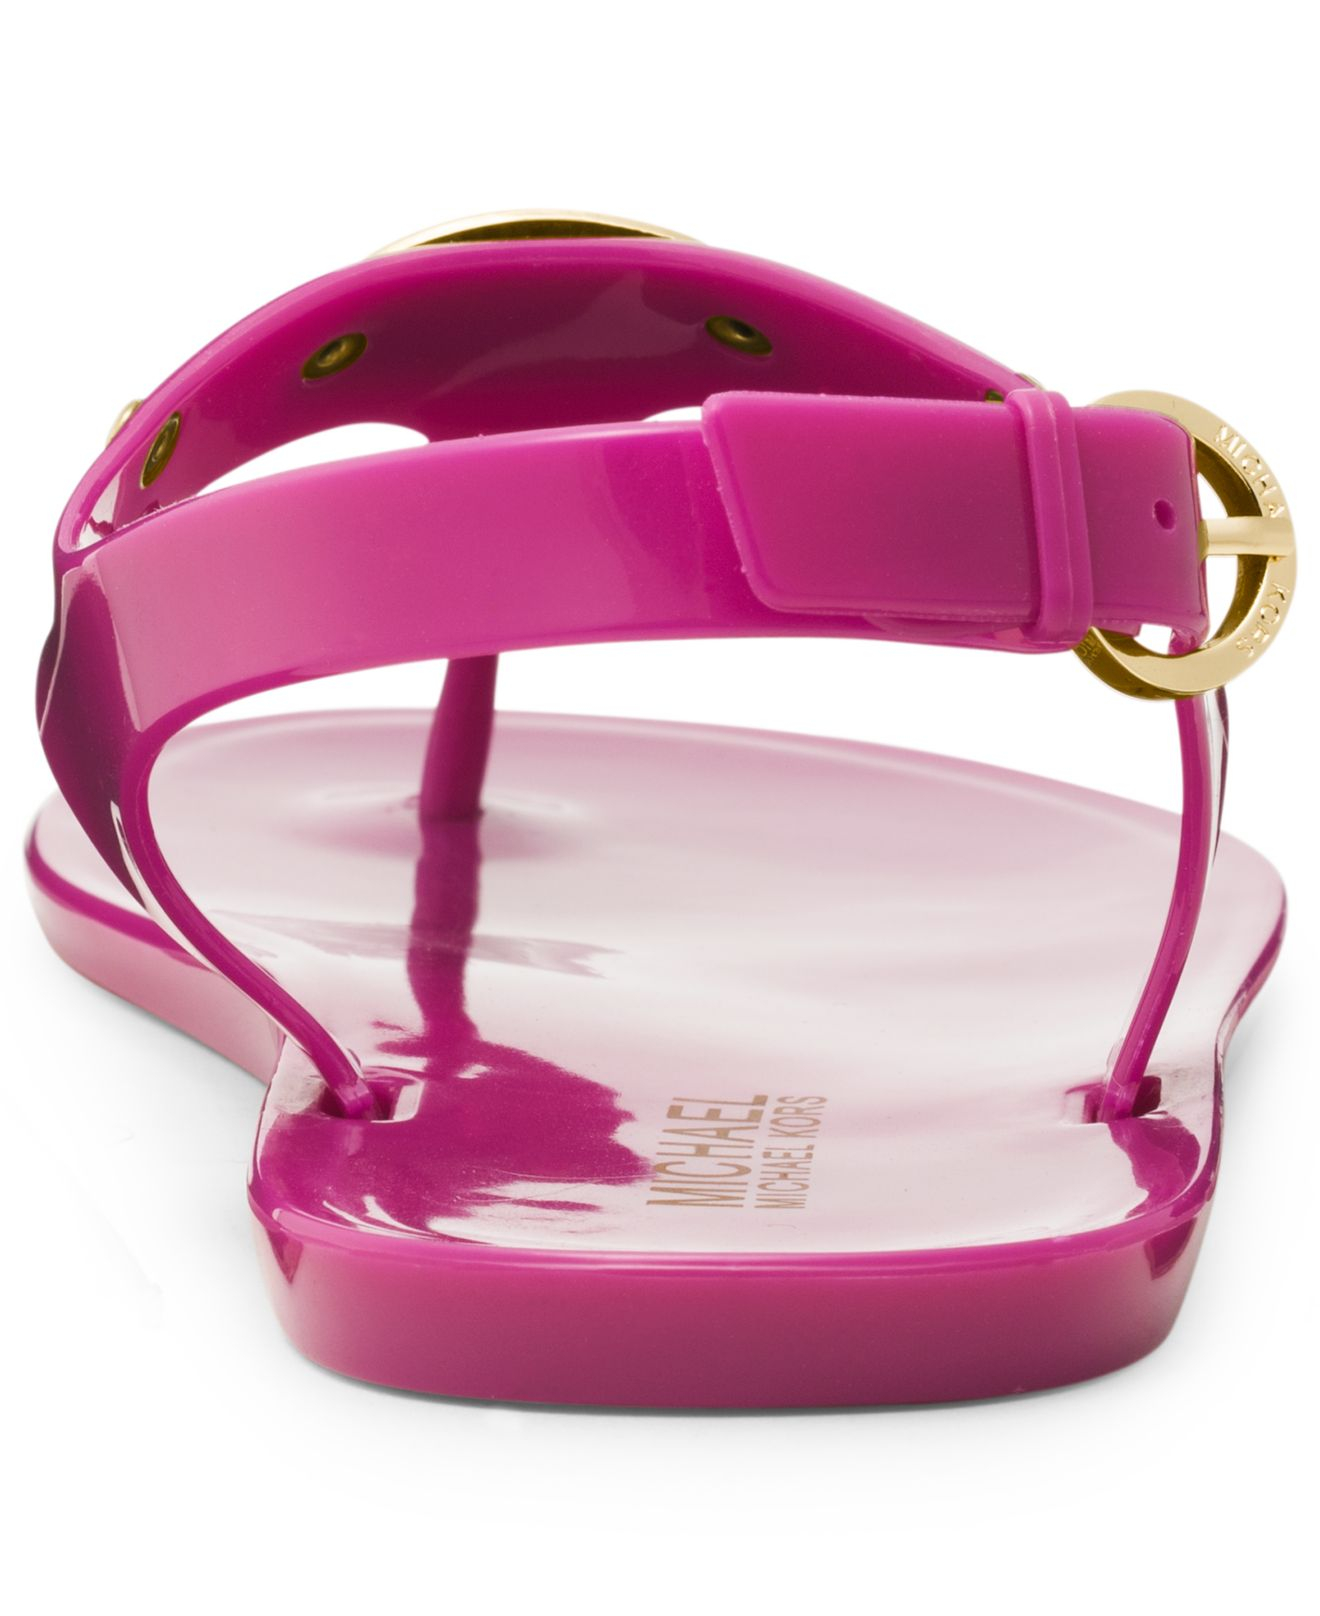 Michael Kors Michael Plate Jelly Sandals in Pink - Lyst